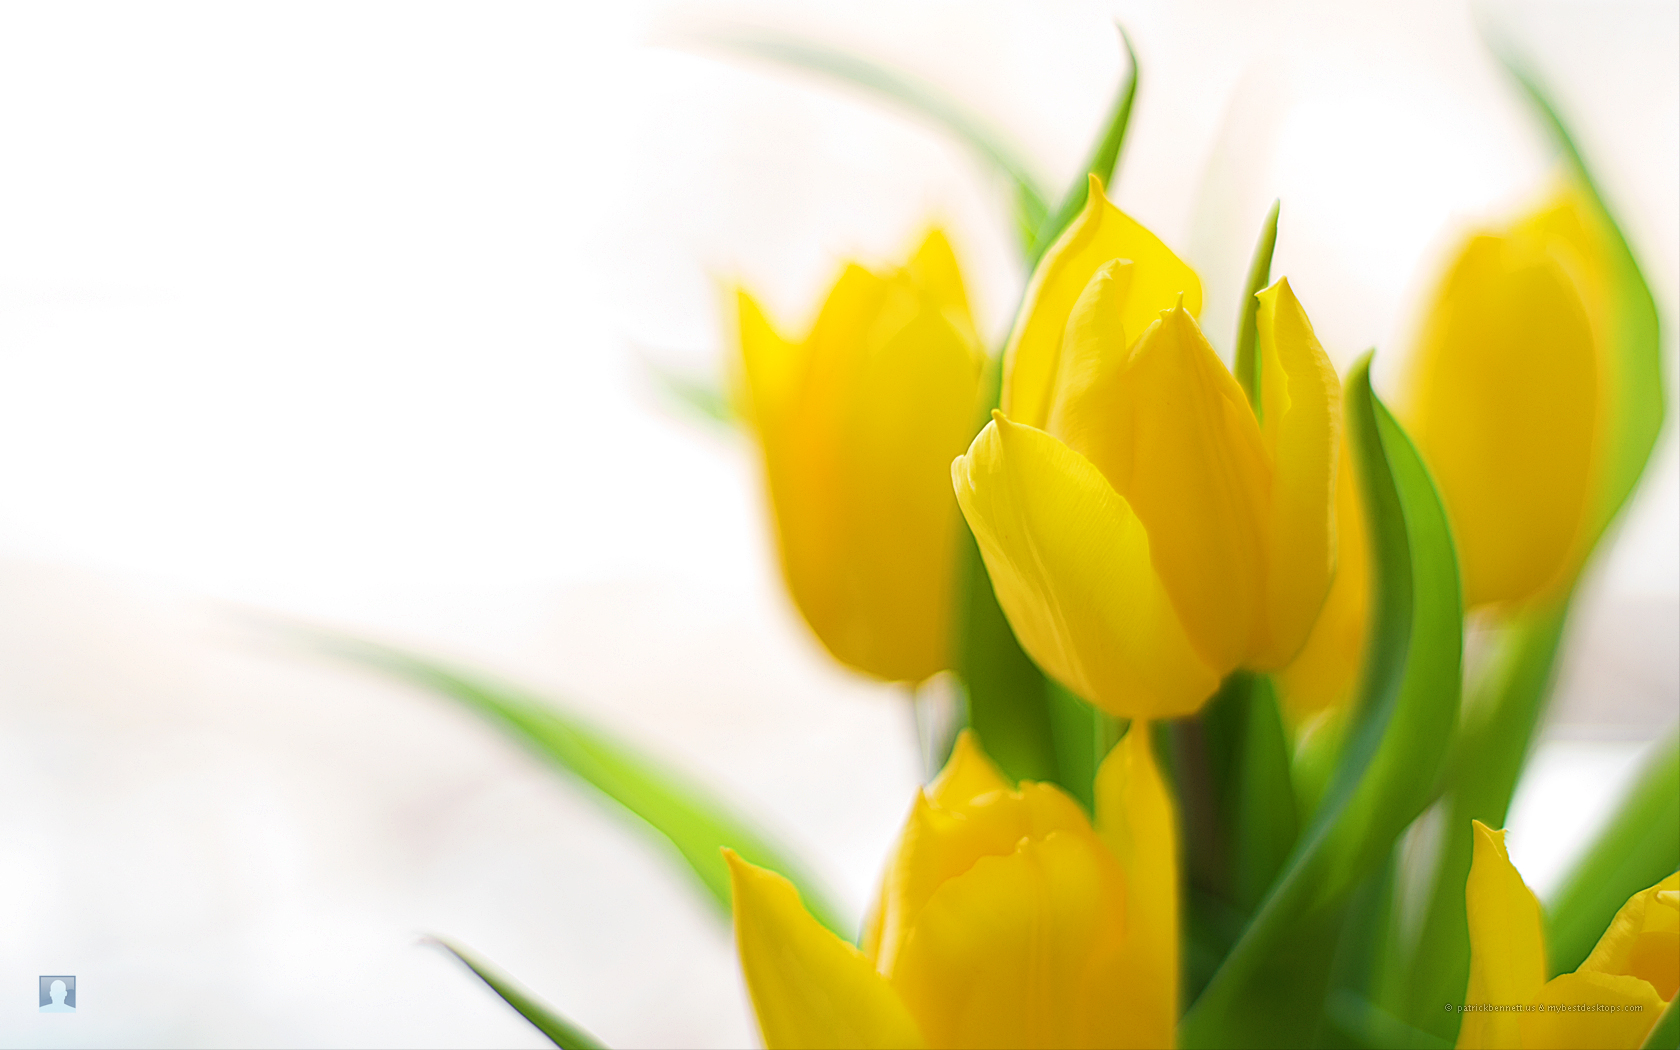 Awesome Desktop Wallpaper Archive Spring Flowers